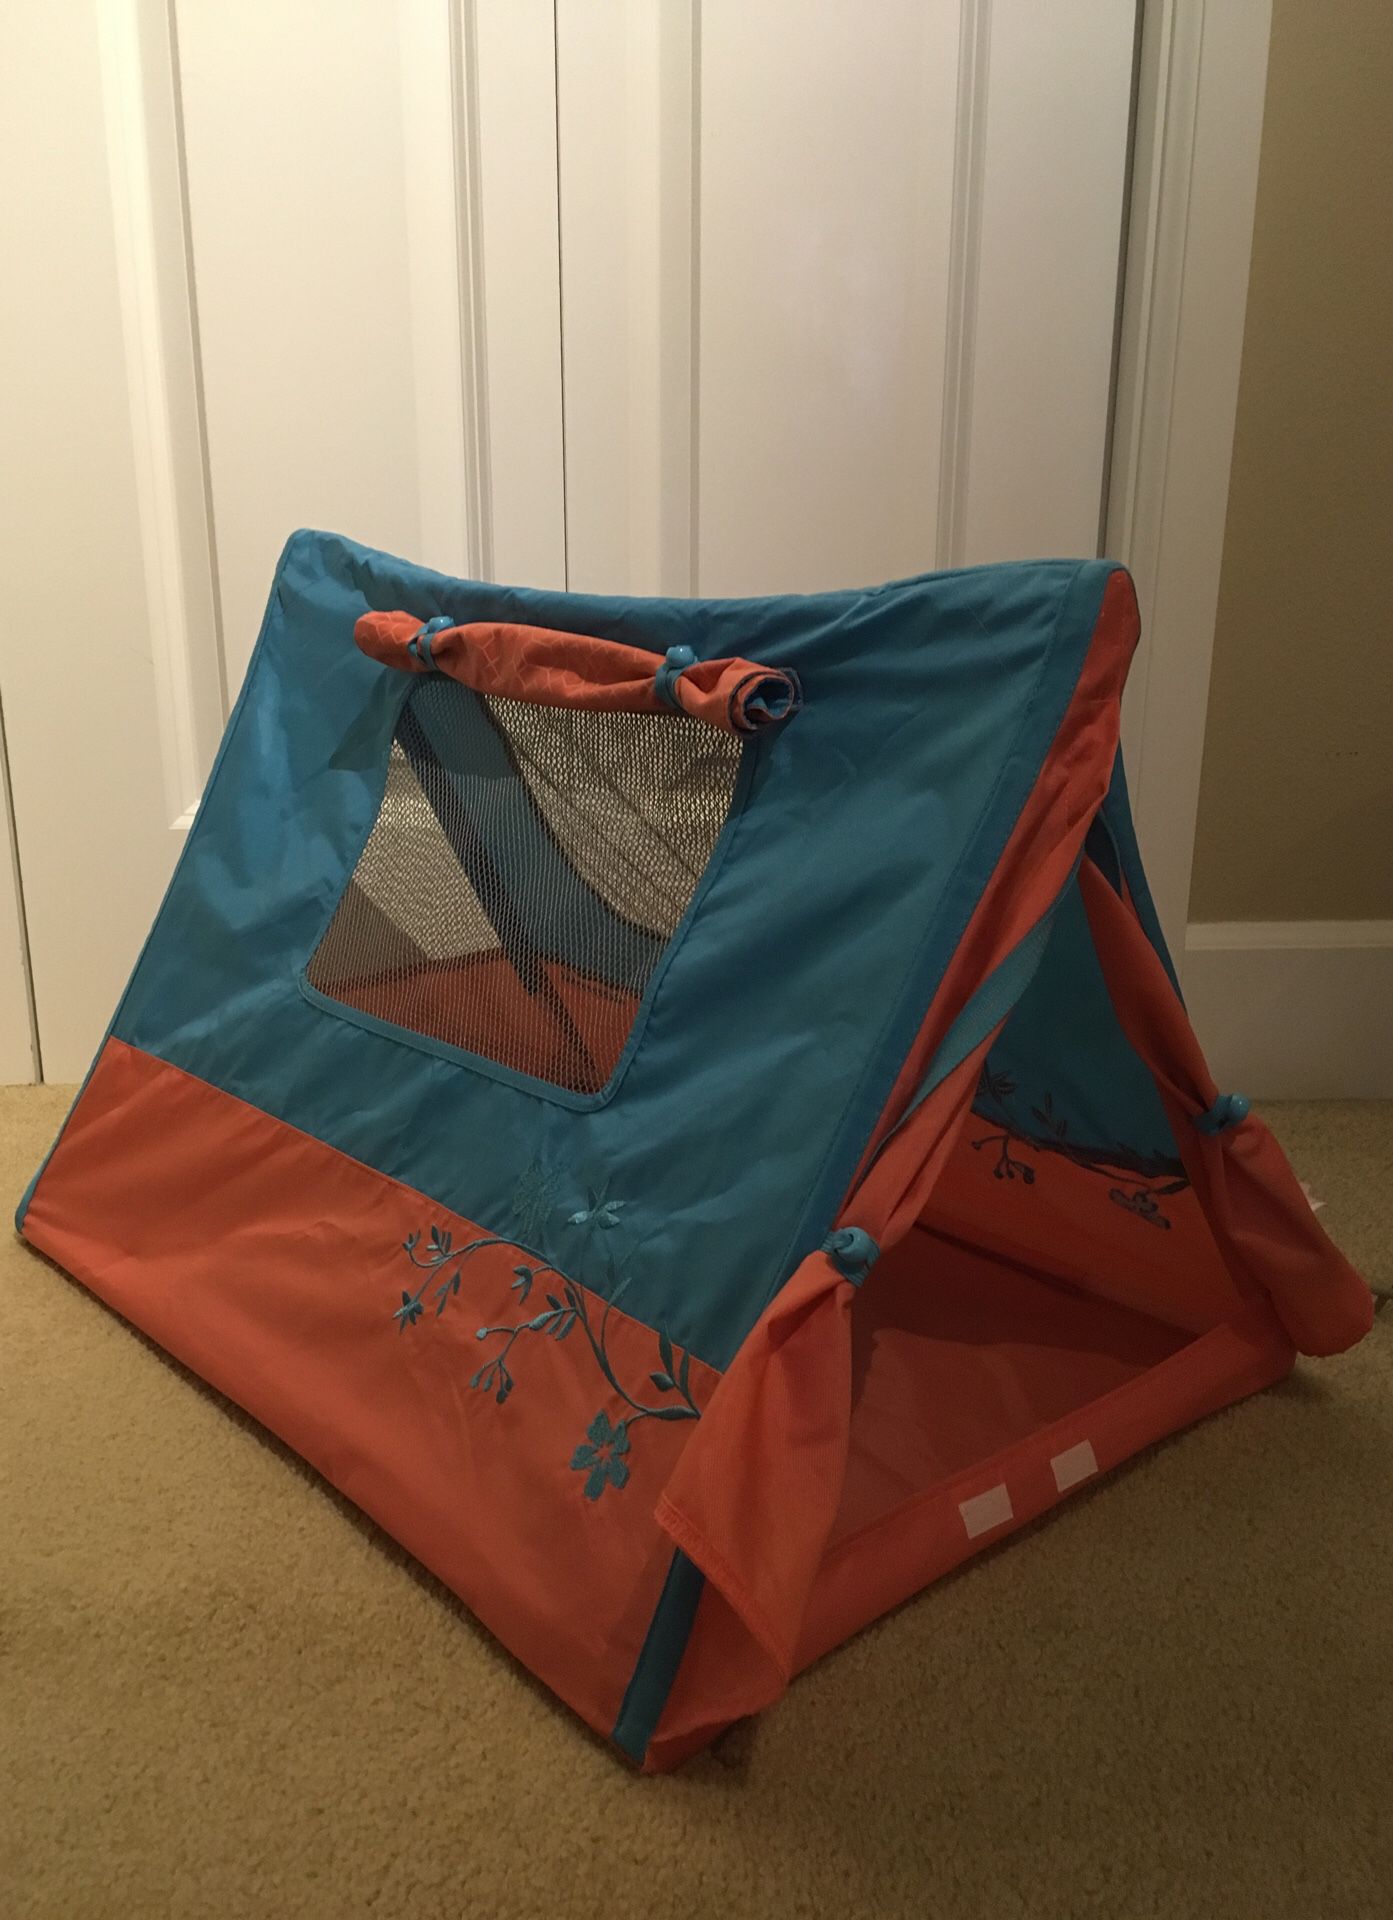 American Girl Camping Tent - like new!